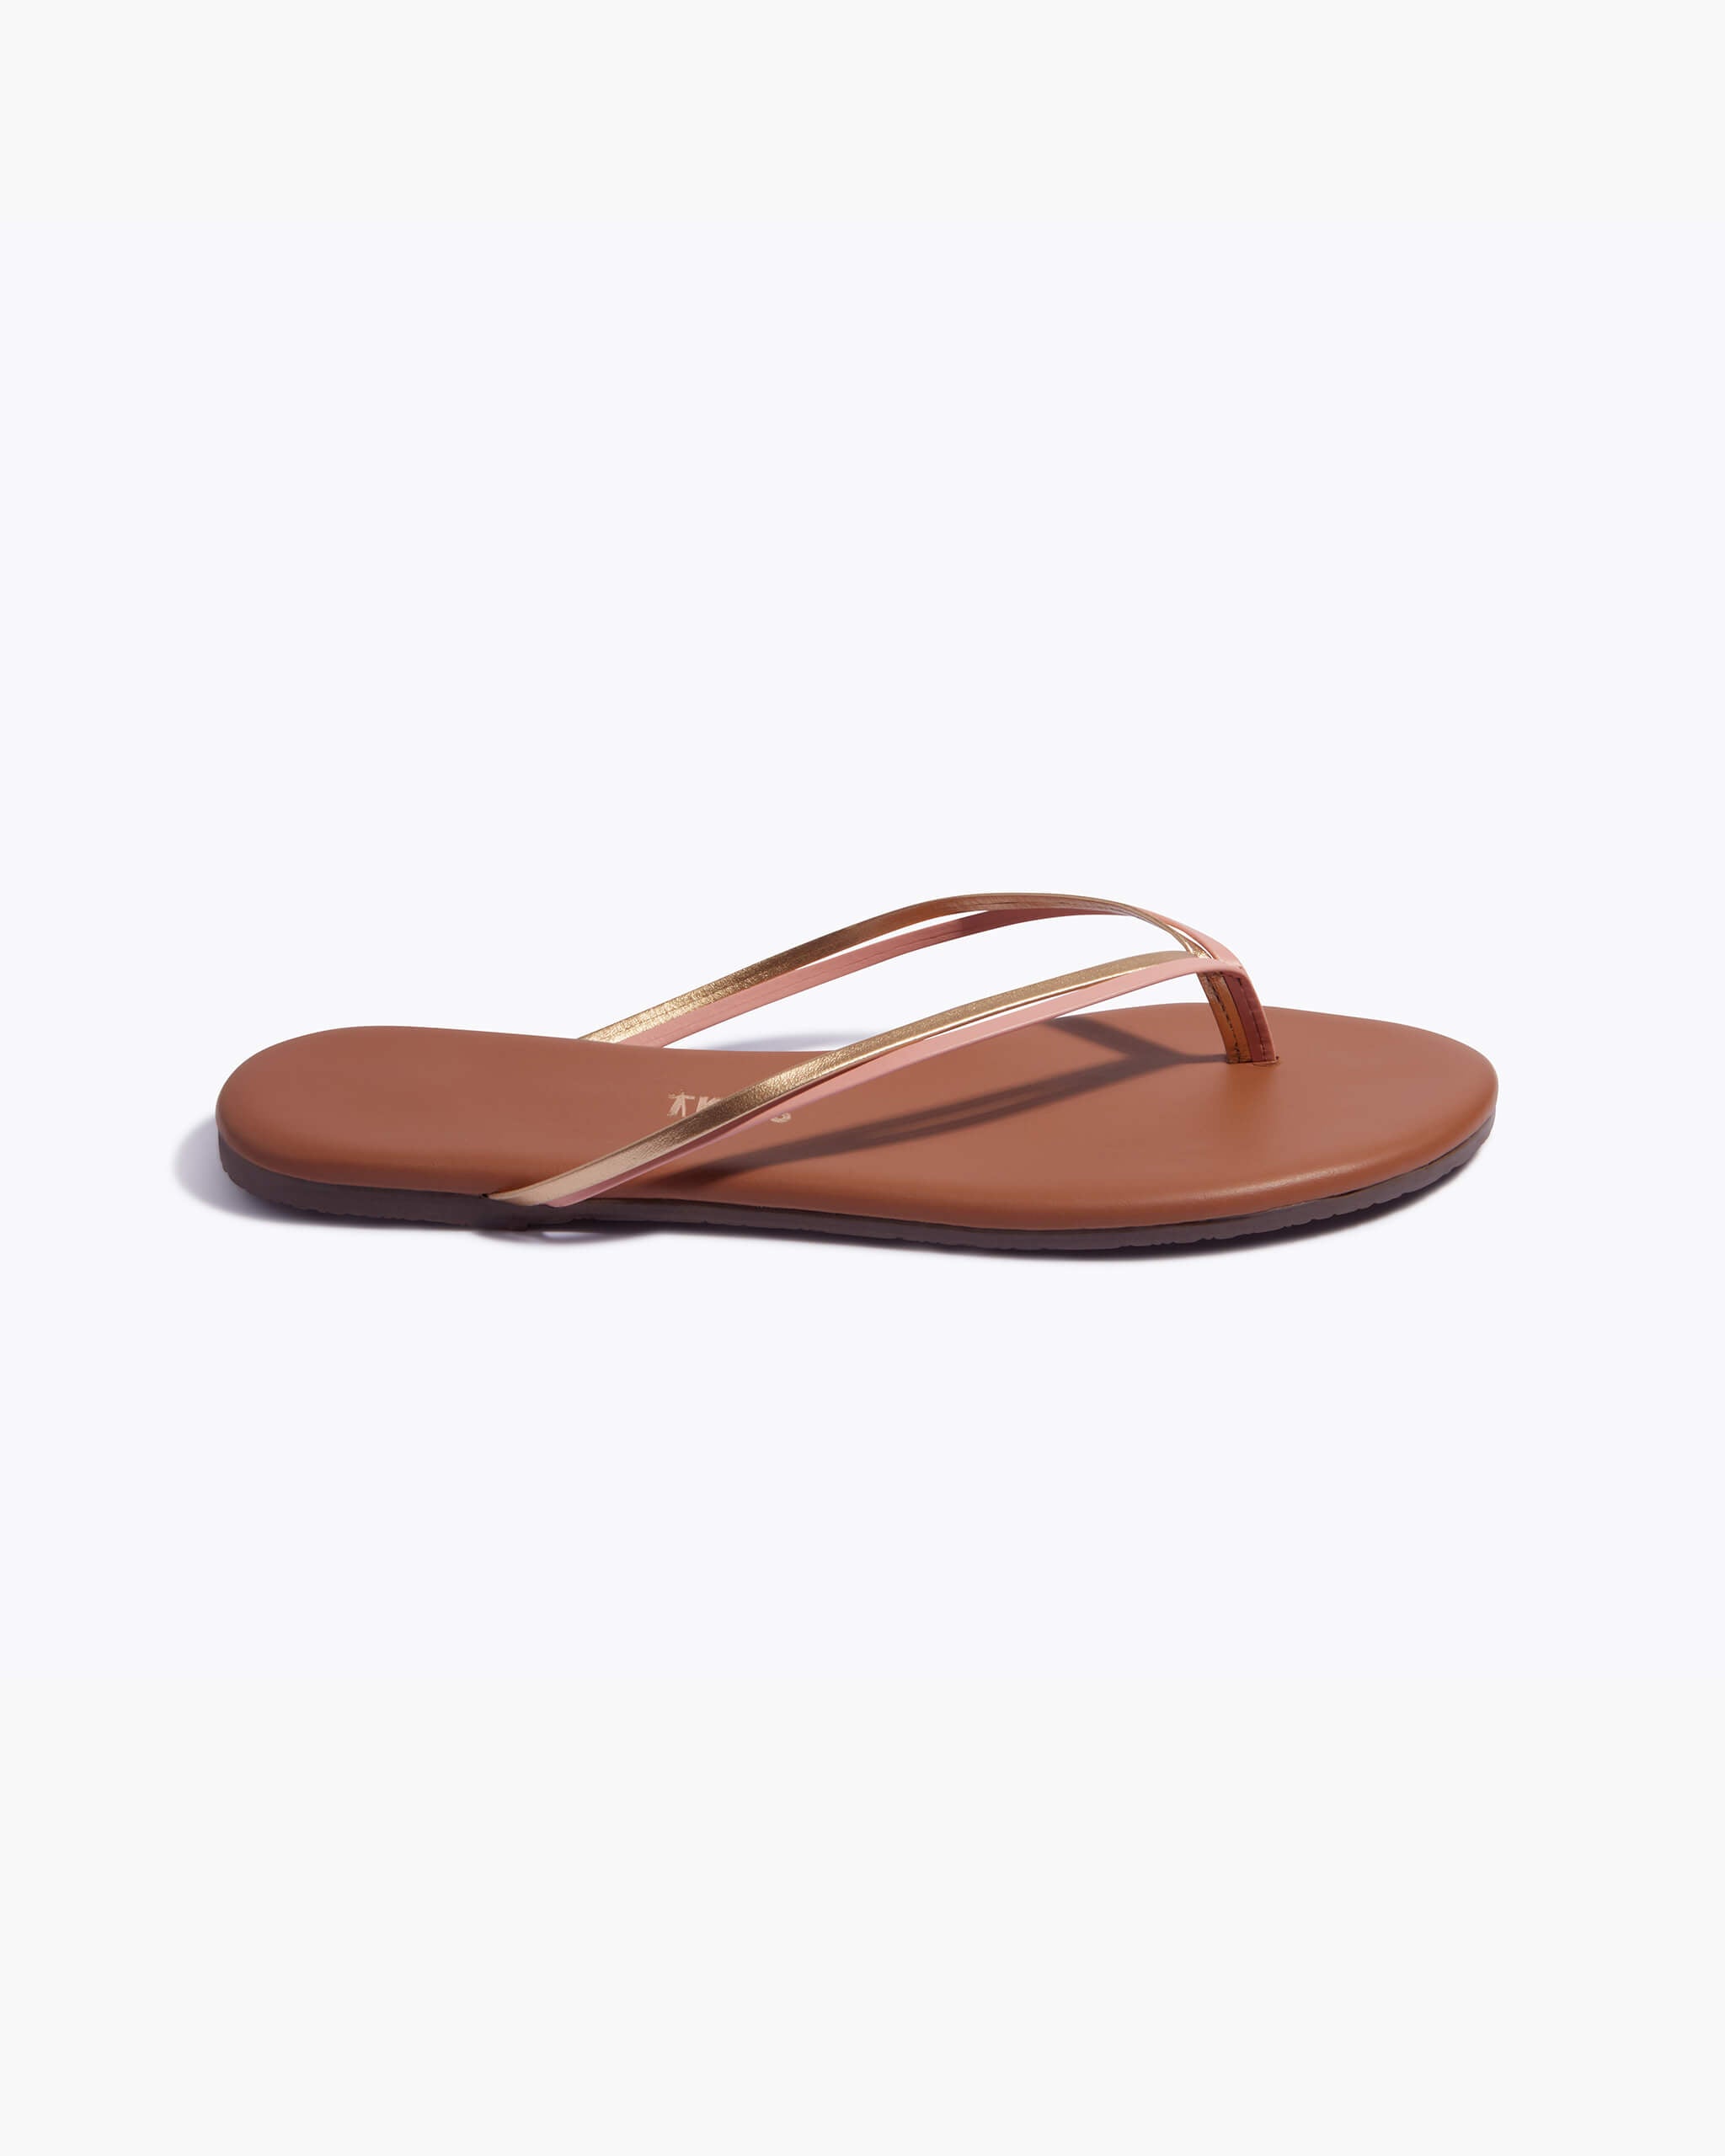 Lush | Leather Flip Flops | TKEES Duos